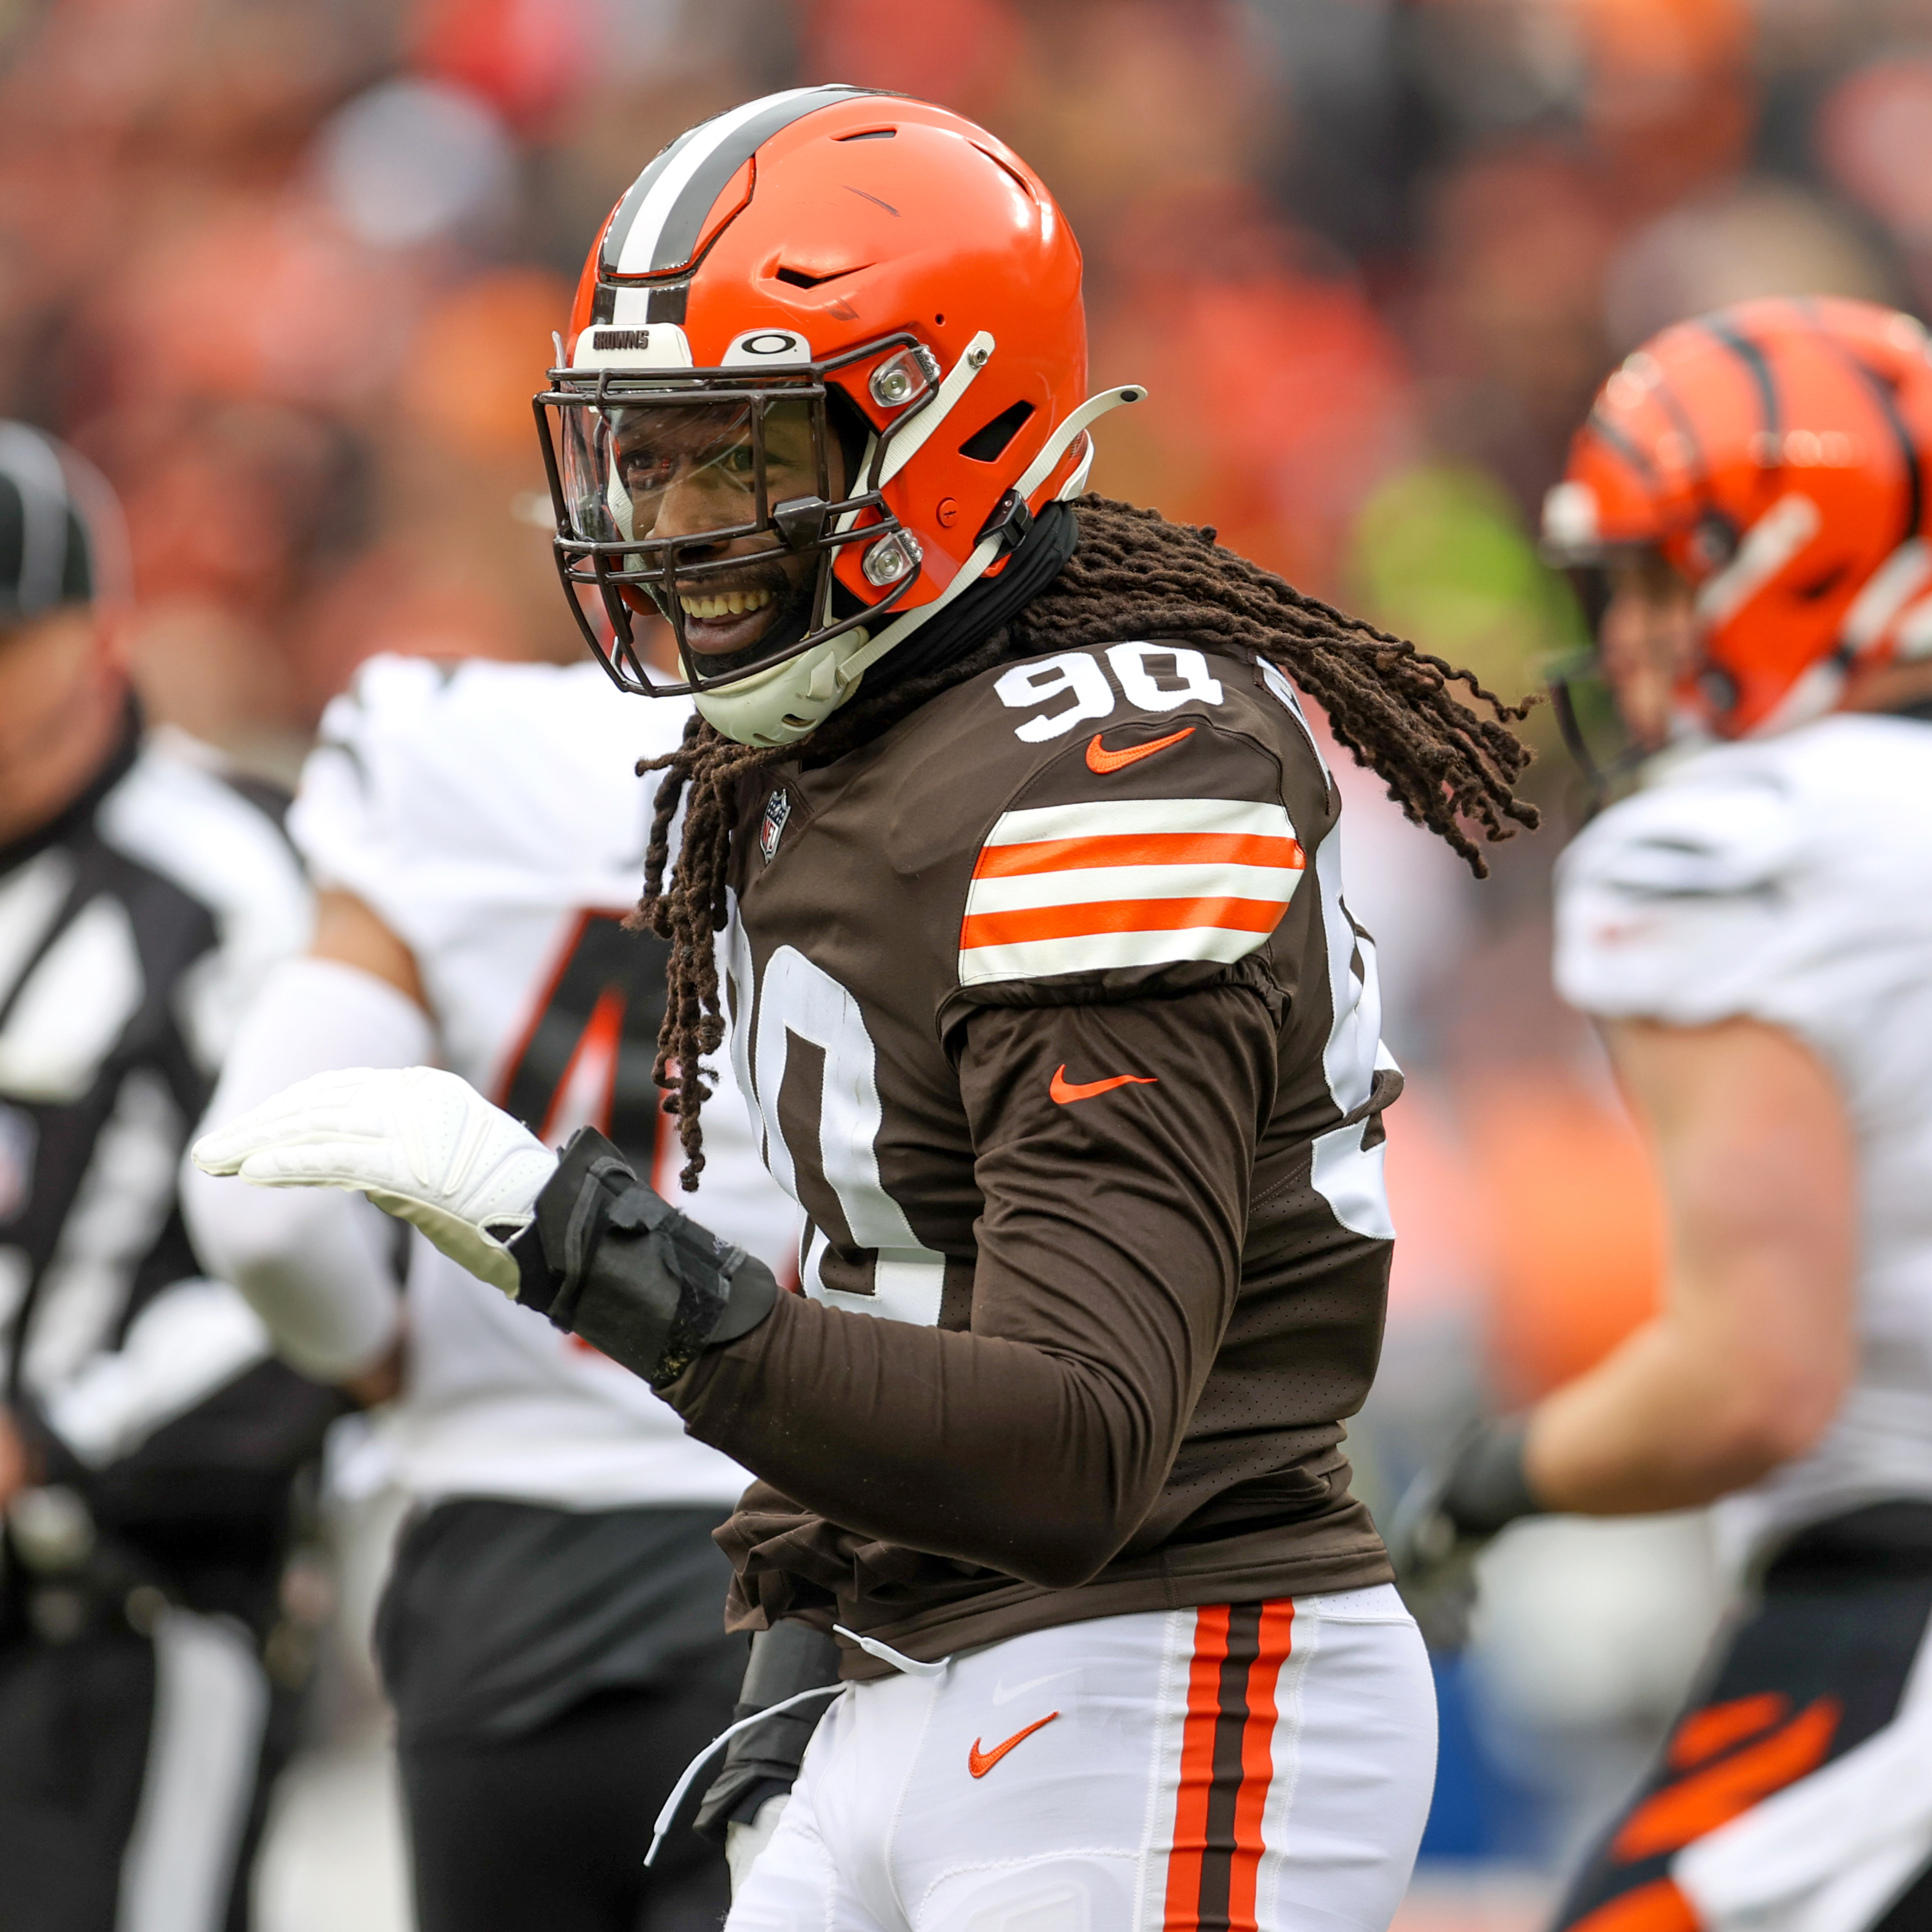 Report: Jadeveon Clowney, Browns Agree to 1 Year, $11M Contract; Had 9 Sacks in ..